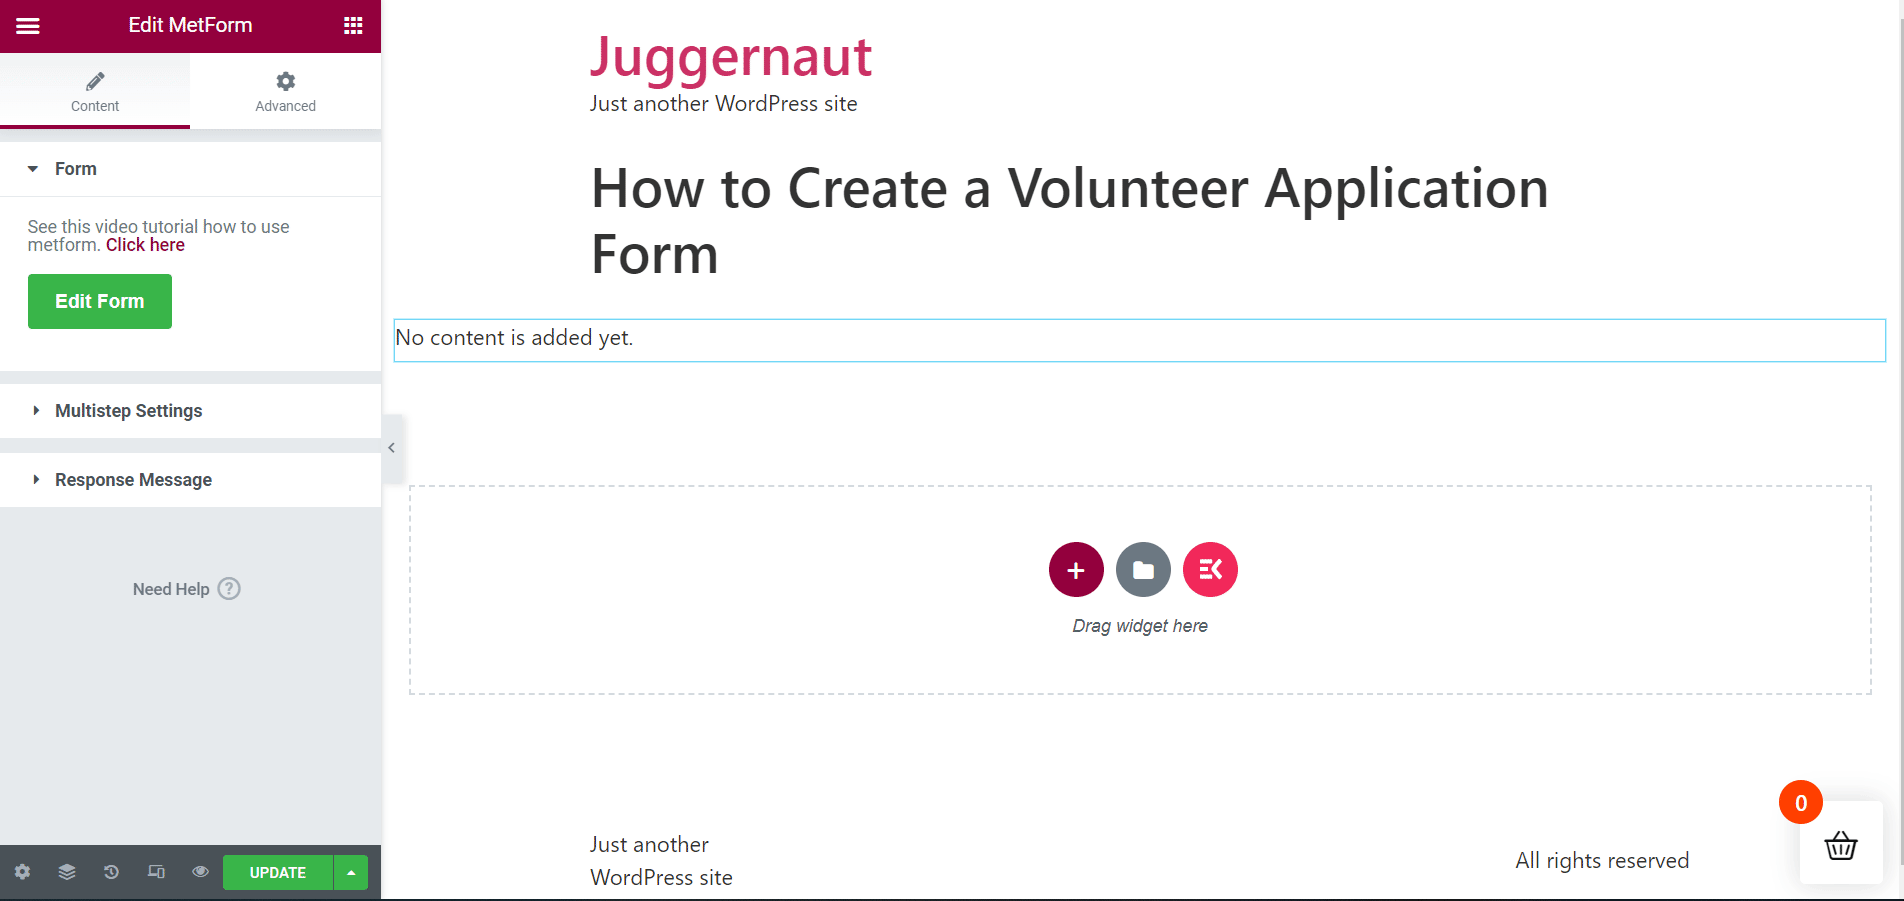 Select the volunteer application form template